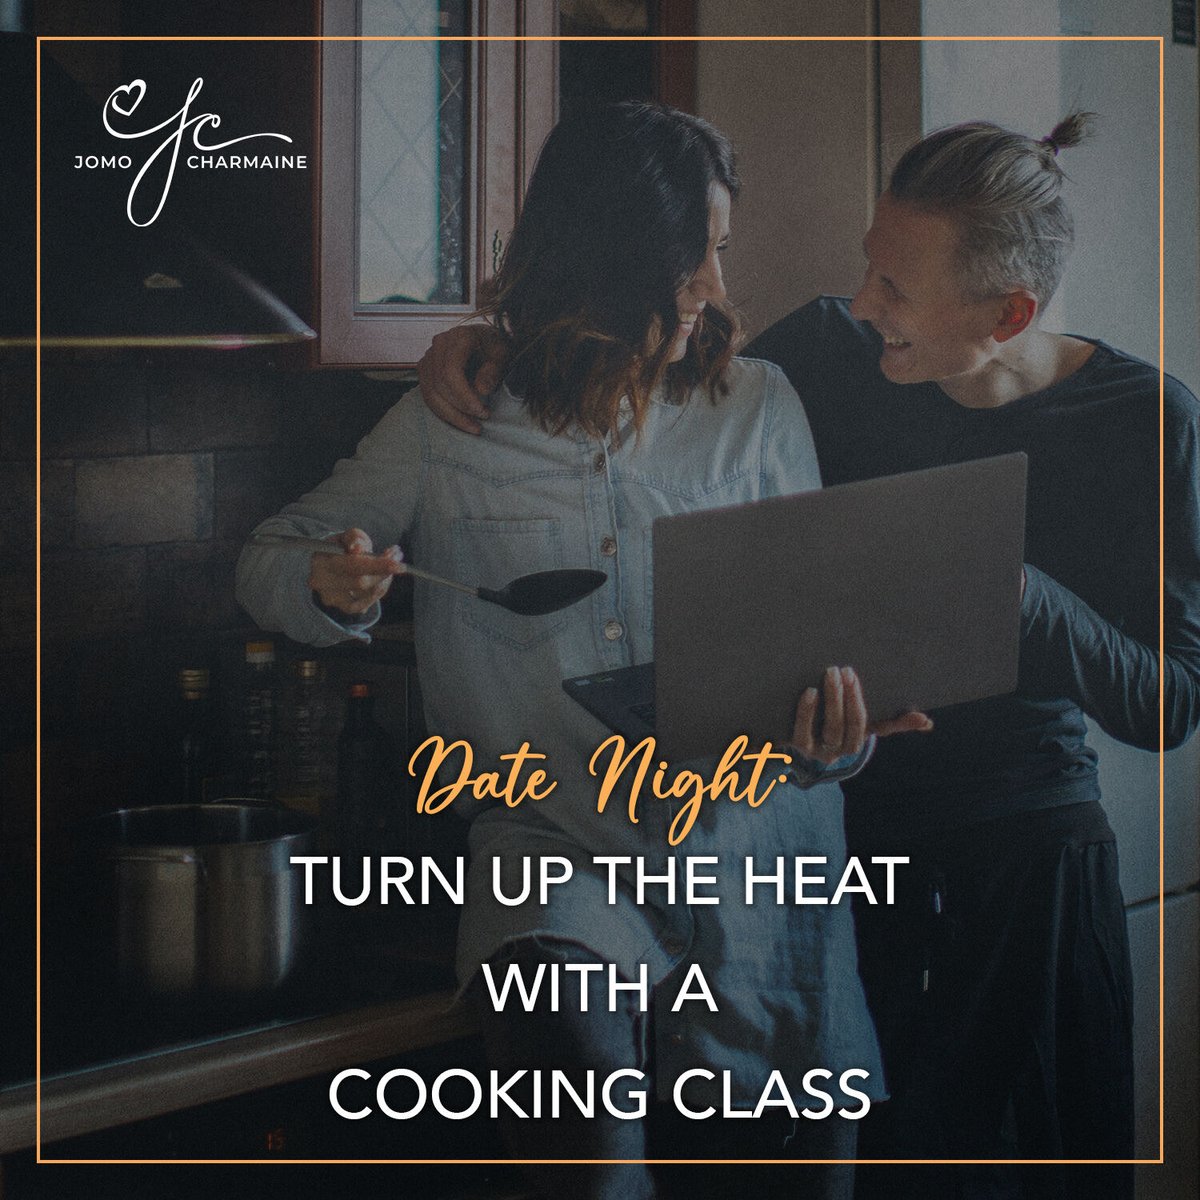 🍽️ Spice up date night with a cooking class! Strengthen your bond, learn new skills, and expand your palettes together. After the fun, enjoy a romantic meal just for two. 

#DateNightIdeas #CookingClass #CouplesGoals #RelationshipGoals #QualityTime #NewCuisine #BondingExperience